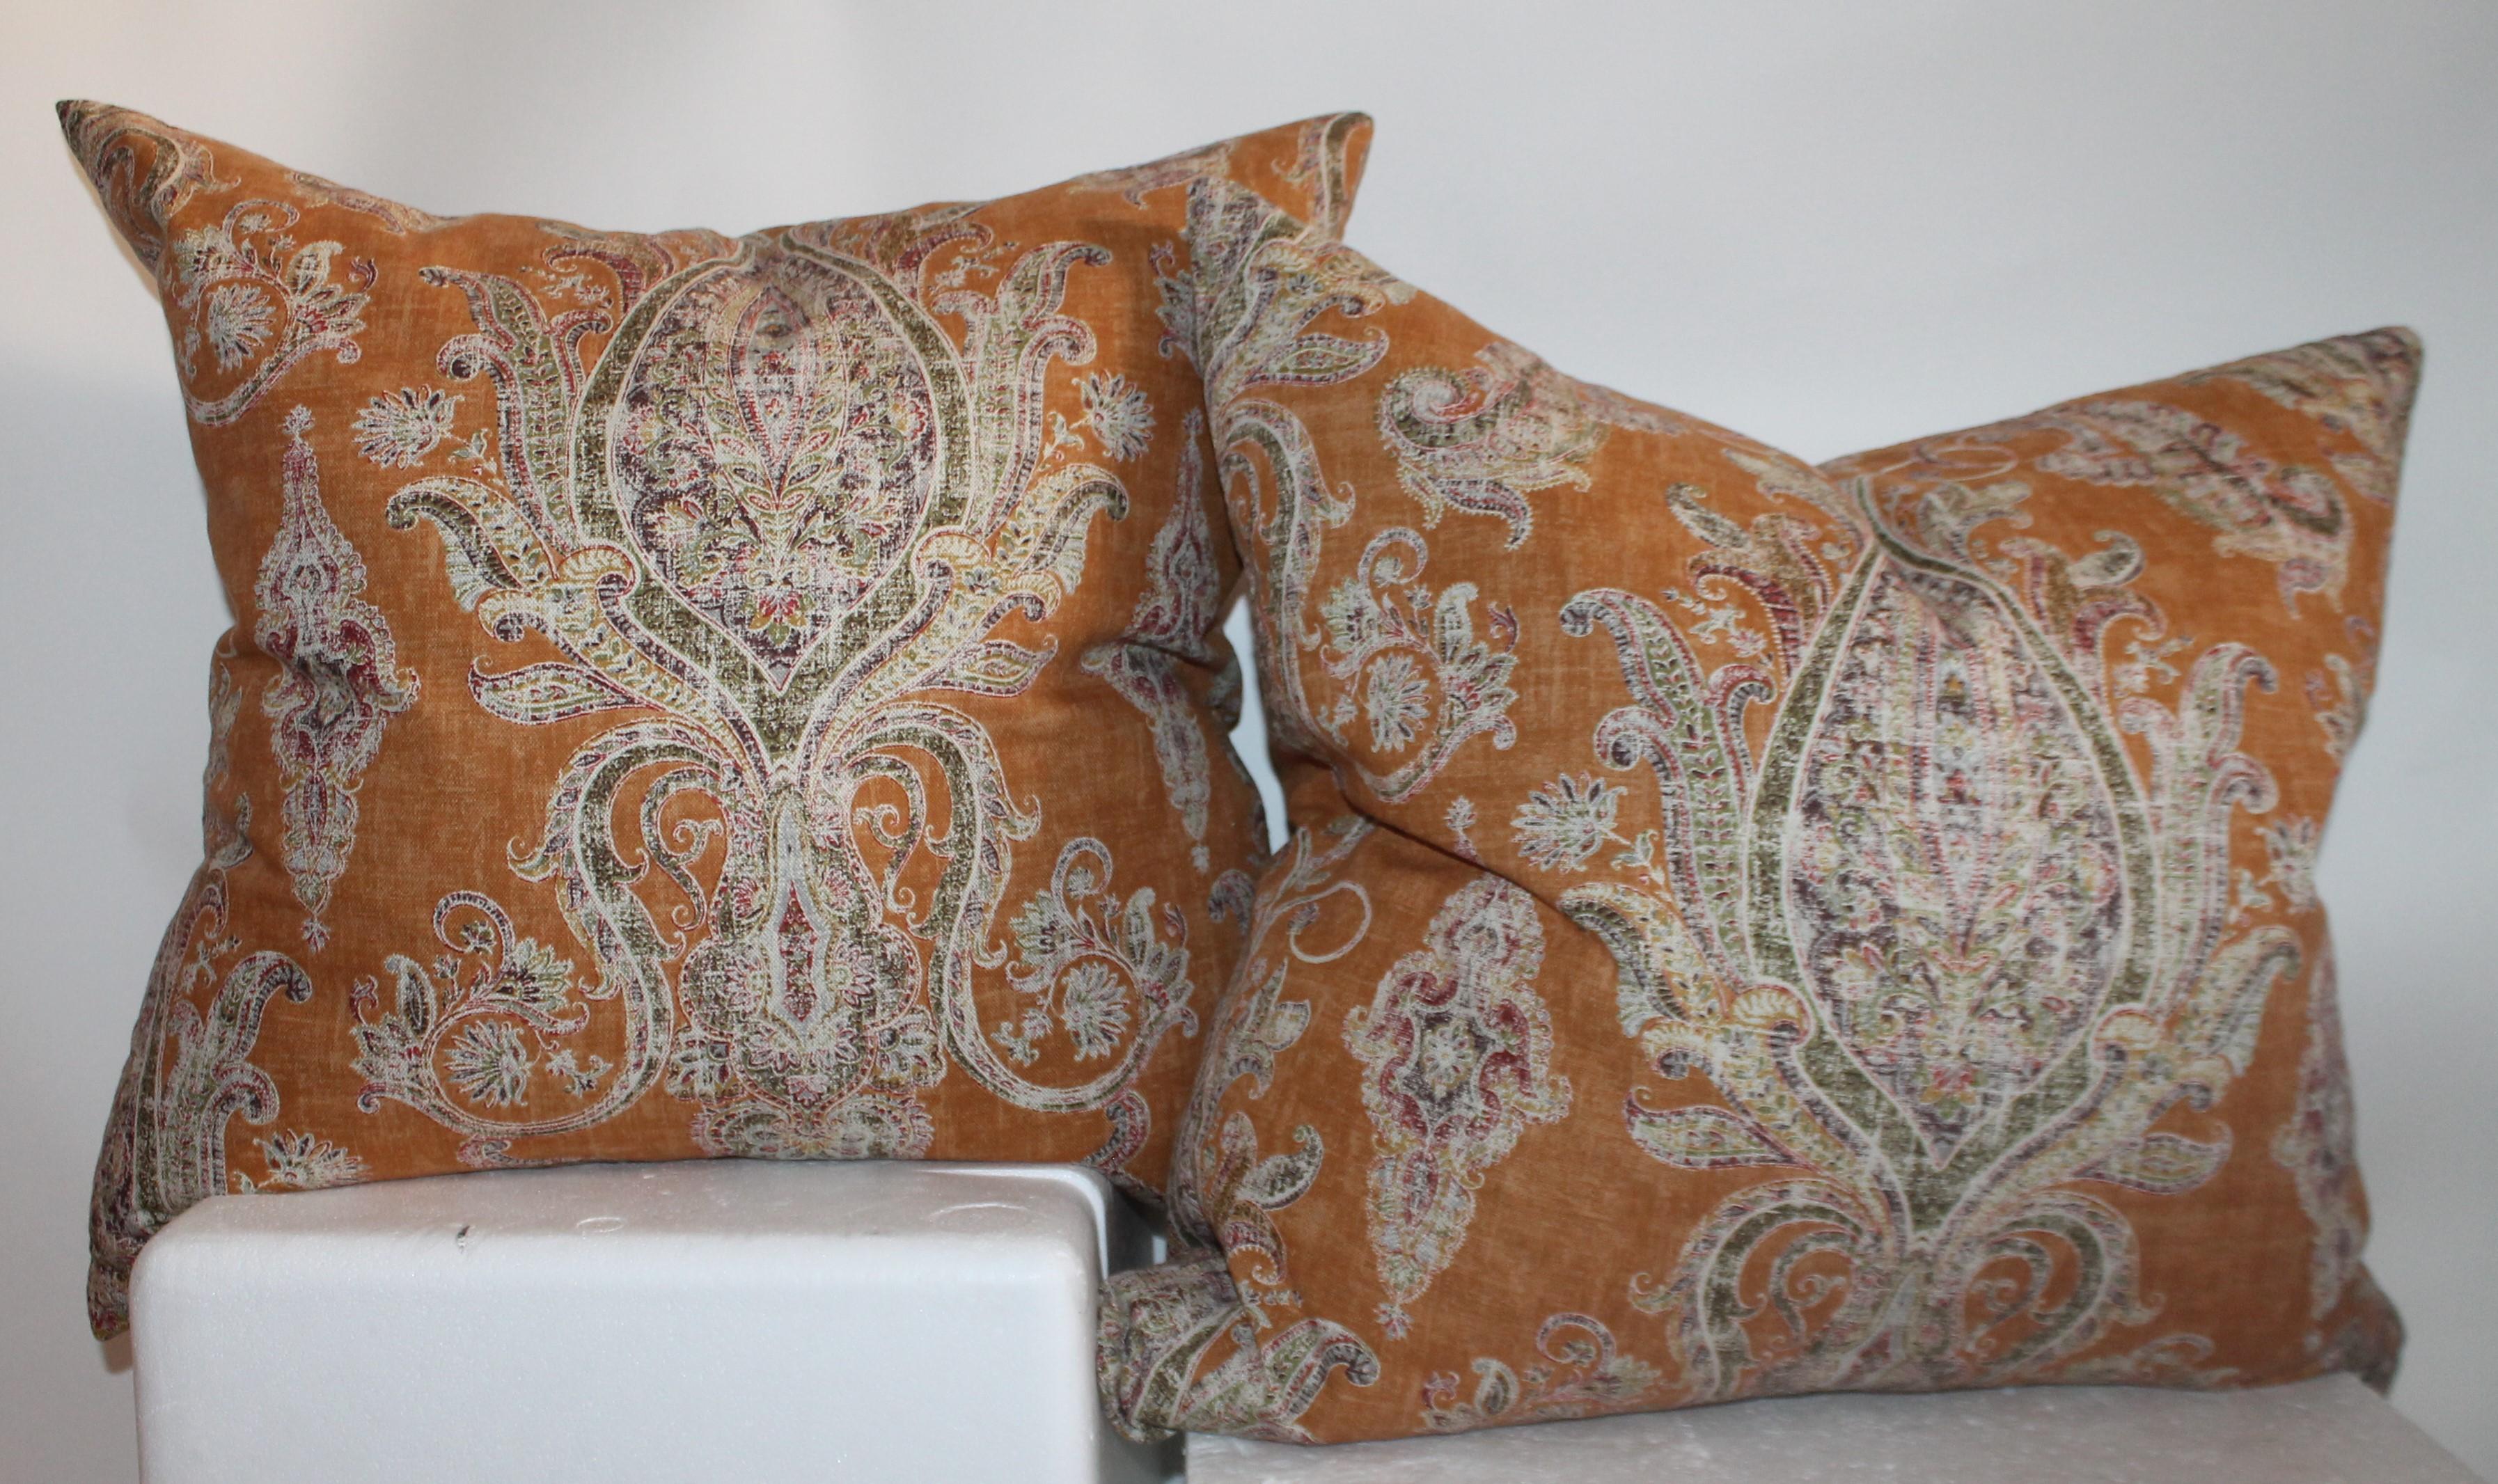 These fine cotton printed linen paisley pillows are in fantastic condition. The inserts are down & feather fill. Condition is very good.